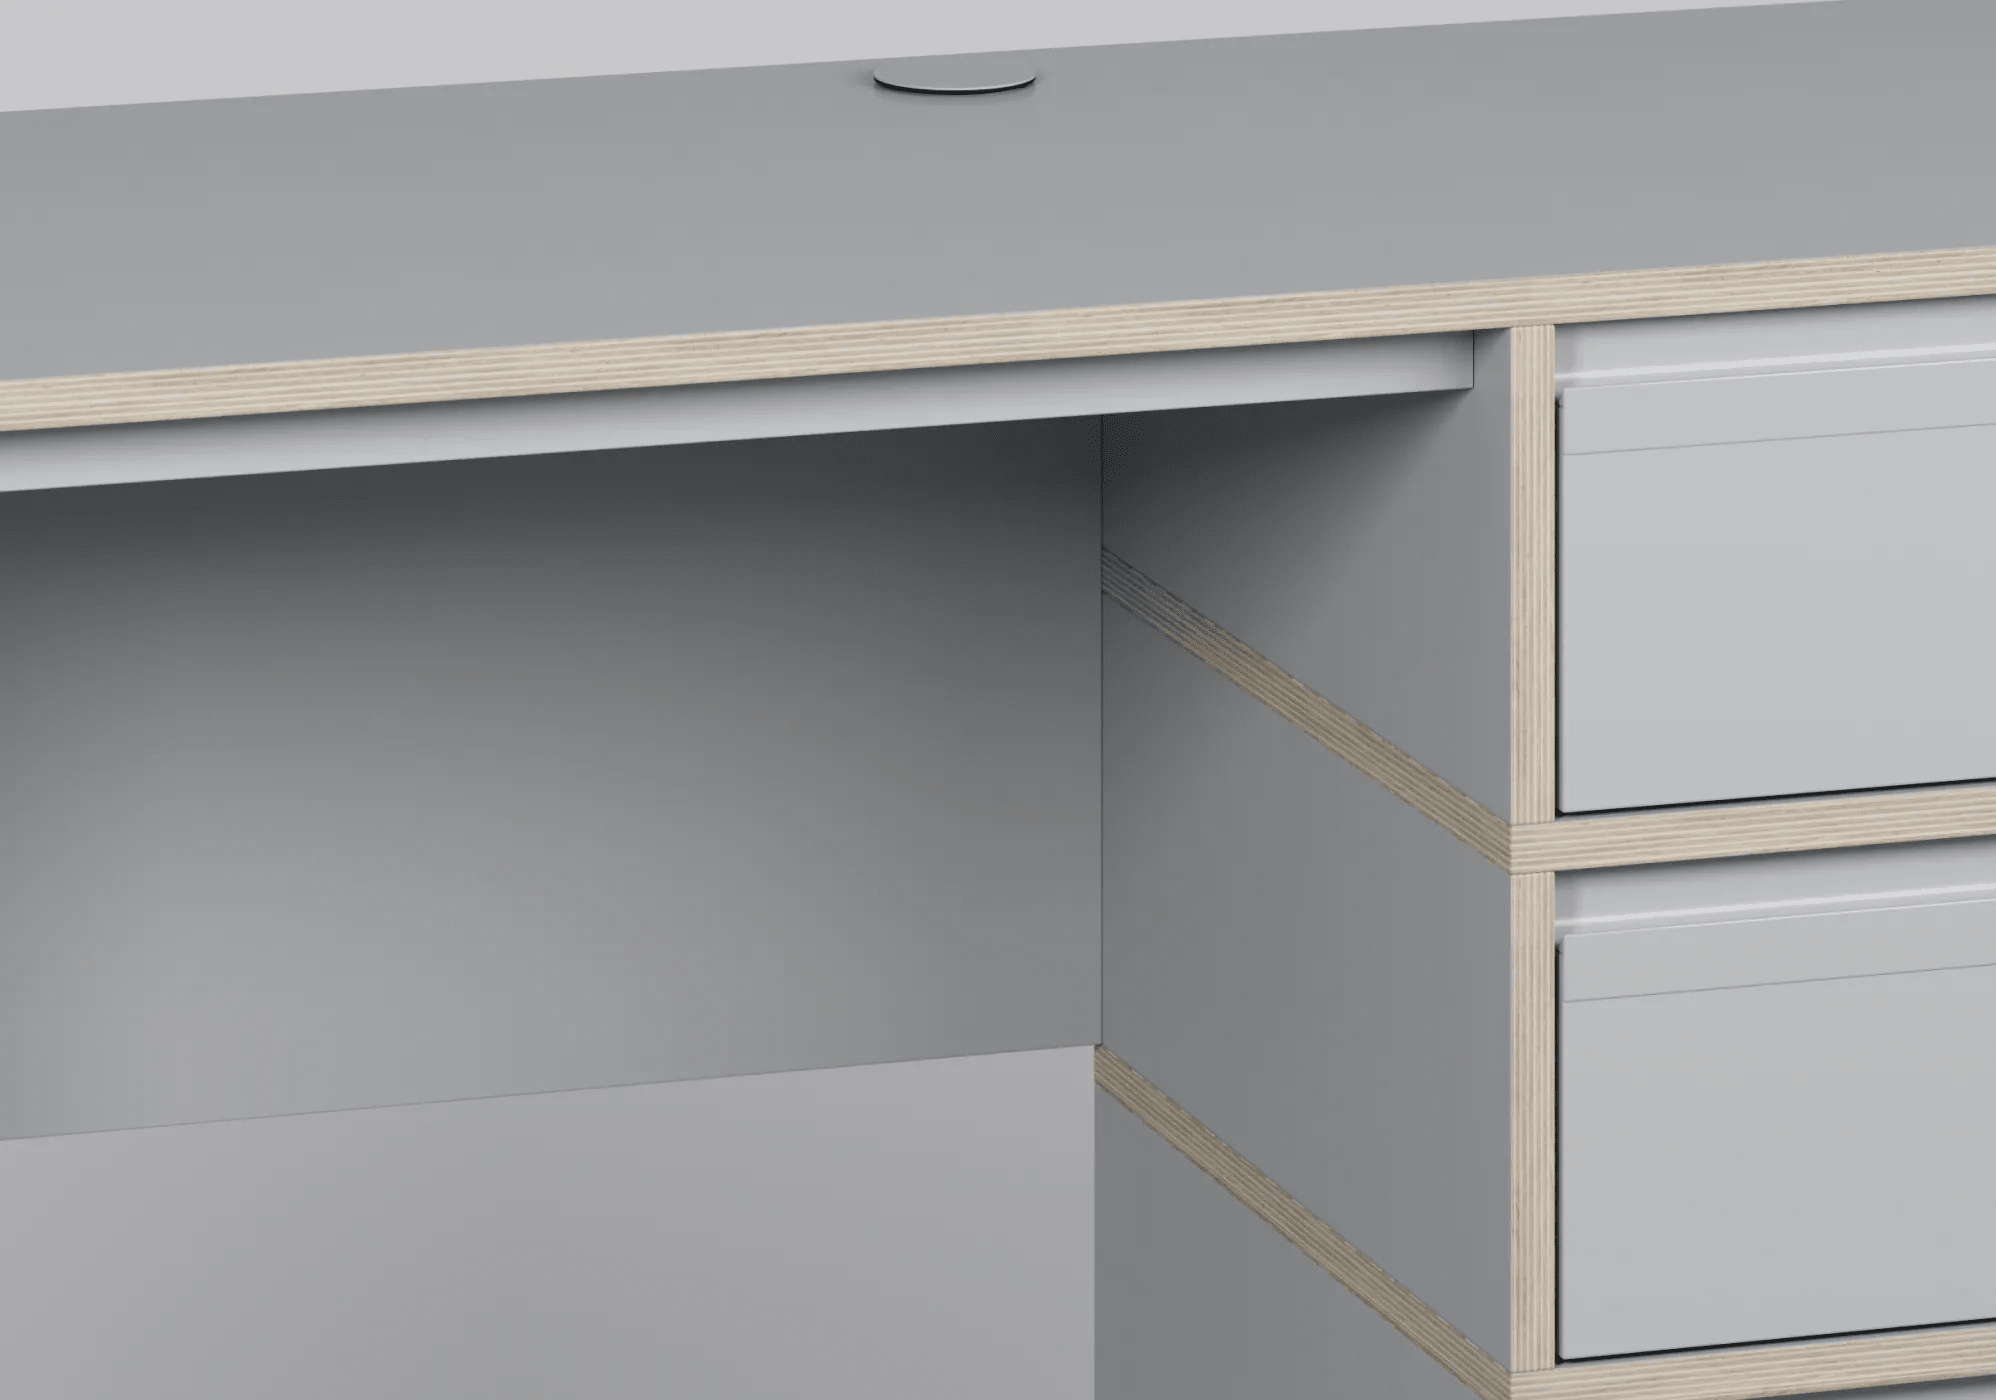 Large Grey Plywood Desk with Doors, Drawers, Backpanels and Cable Management plywood - 160x73x50cm 4